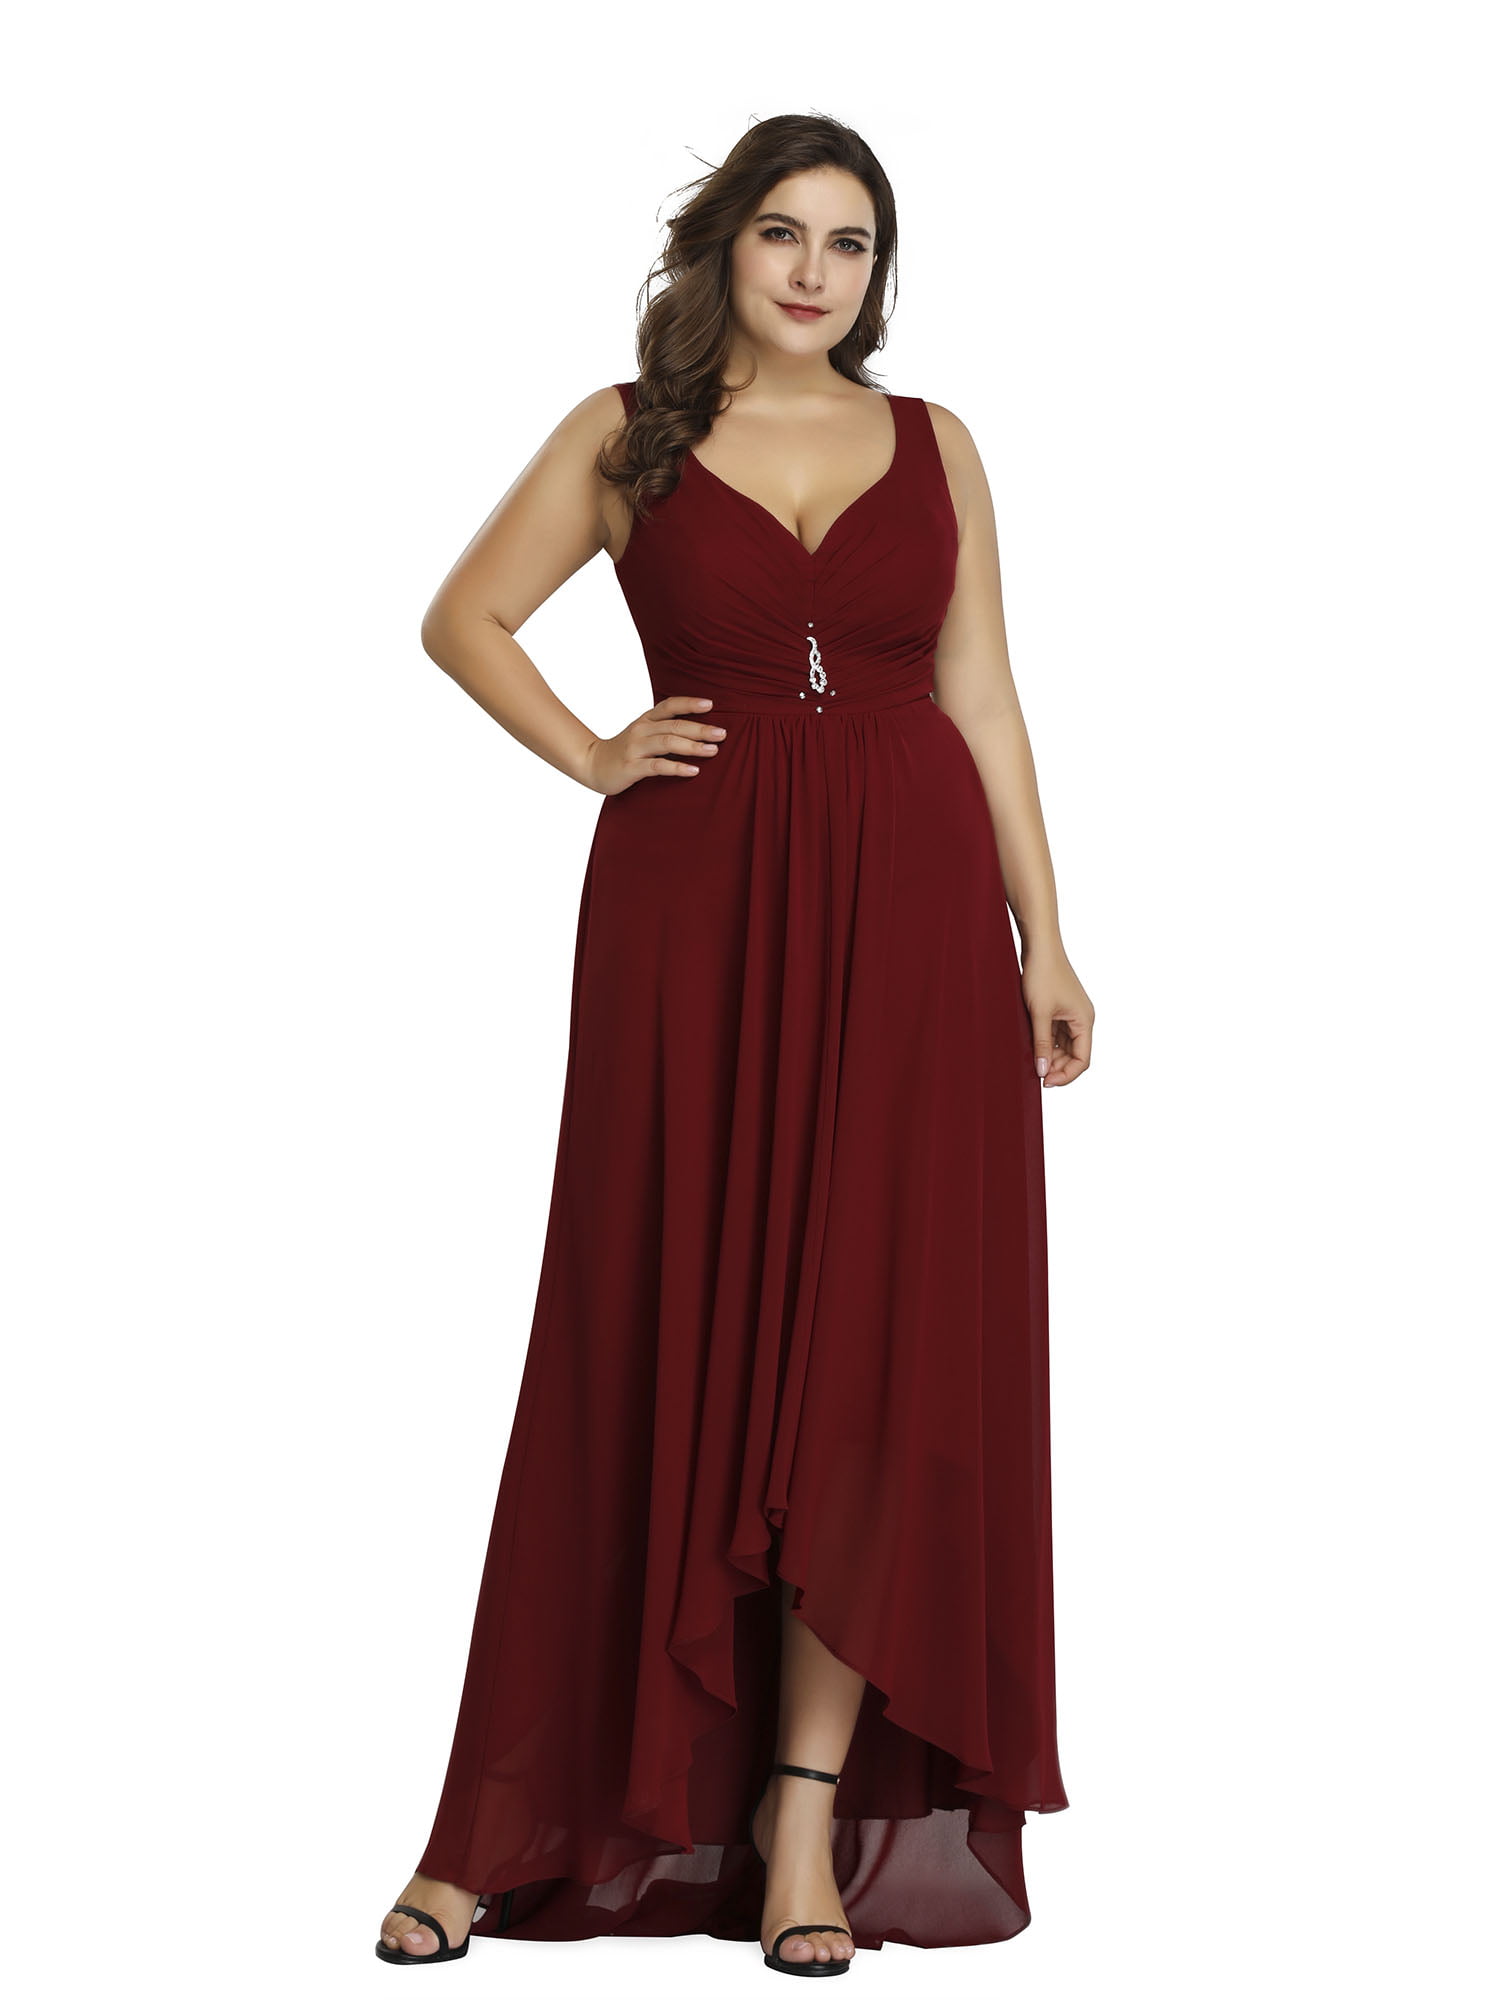 US Ever-Pretty Plus Size V-neck Long Evening Party Dresses Bridesmaid Prom Gowns